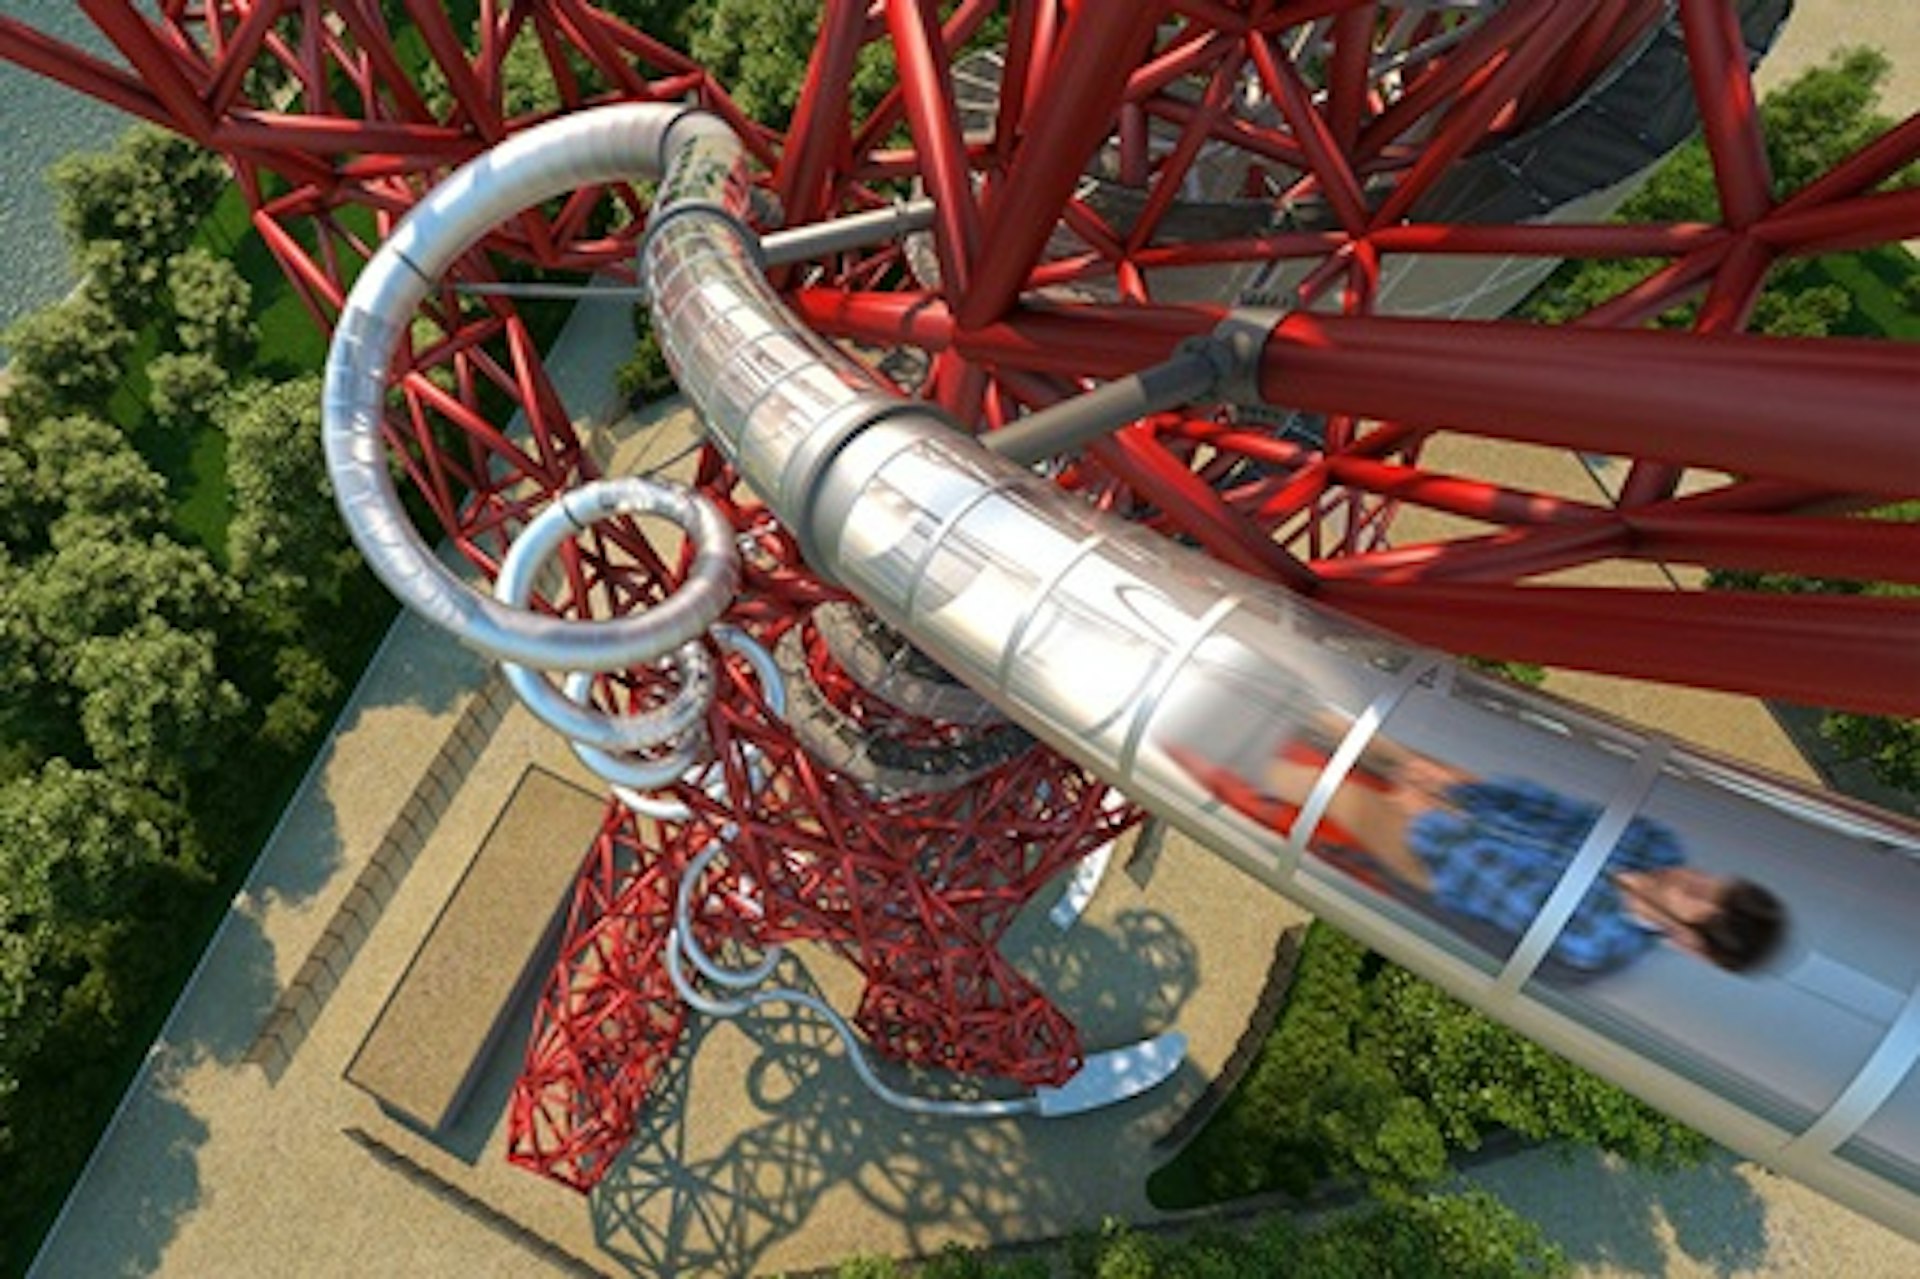 Thames Jet Boat Rush and The Slide at The ArcelorMittal Orbit for Two 2